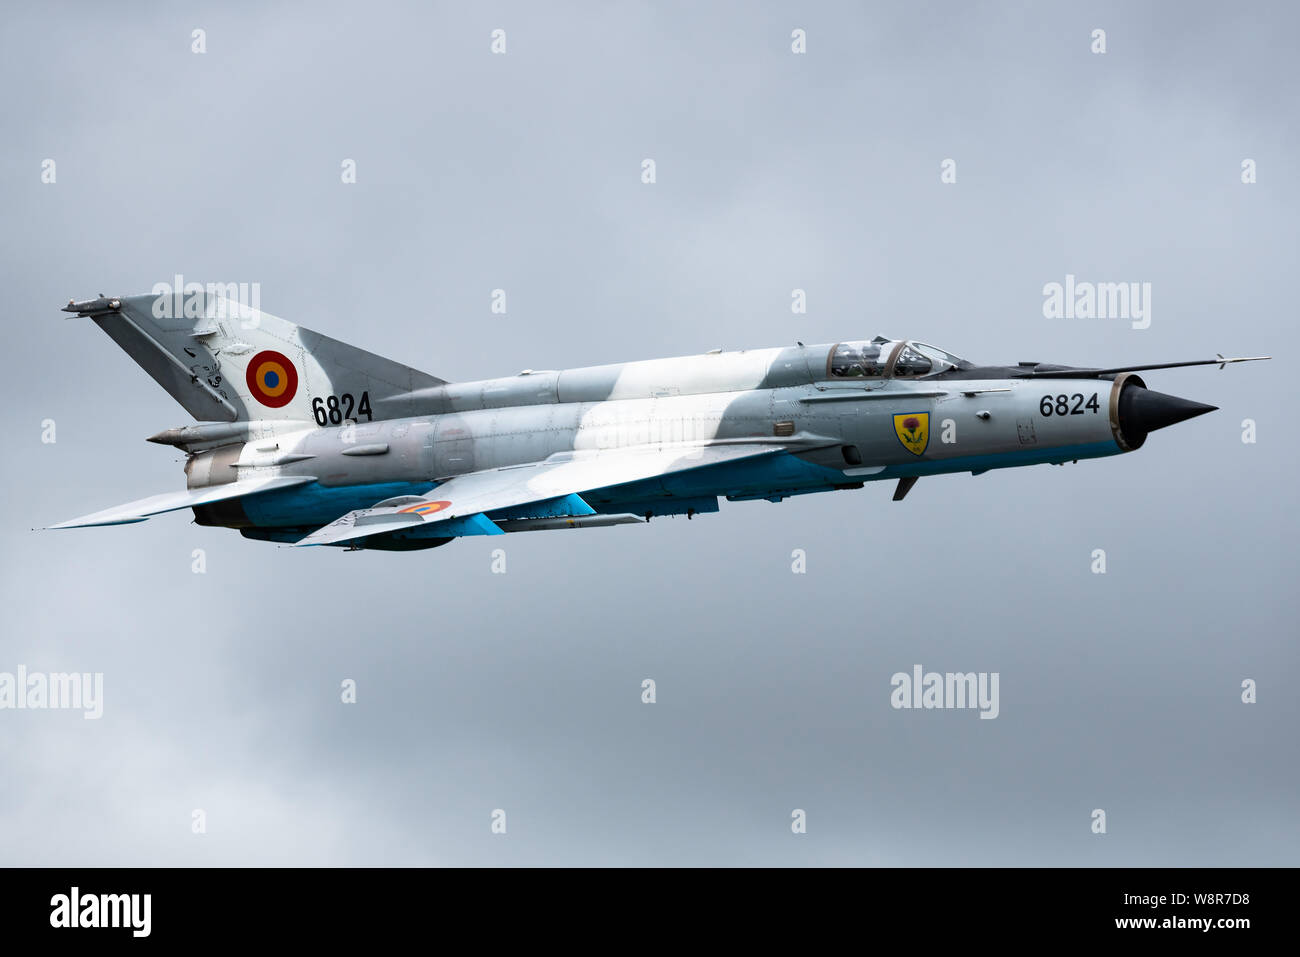 A Mikoyan-Gurevich MiG-21 supersonic fighter jet of the Romanian Air Force. Stock Photo